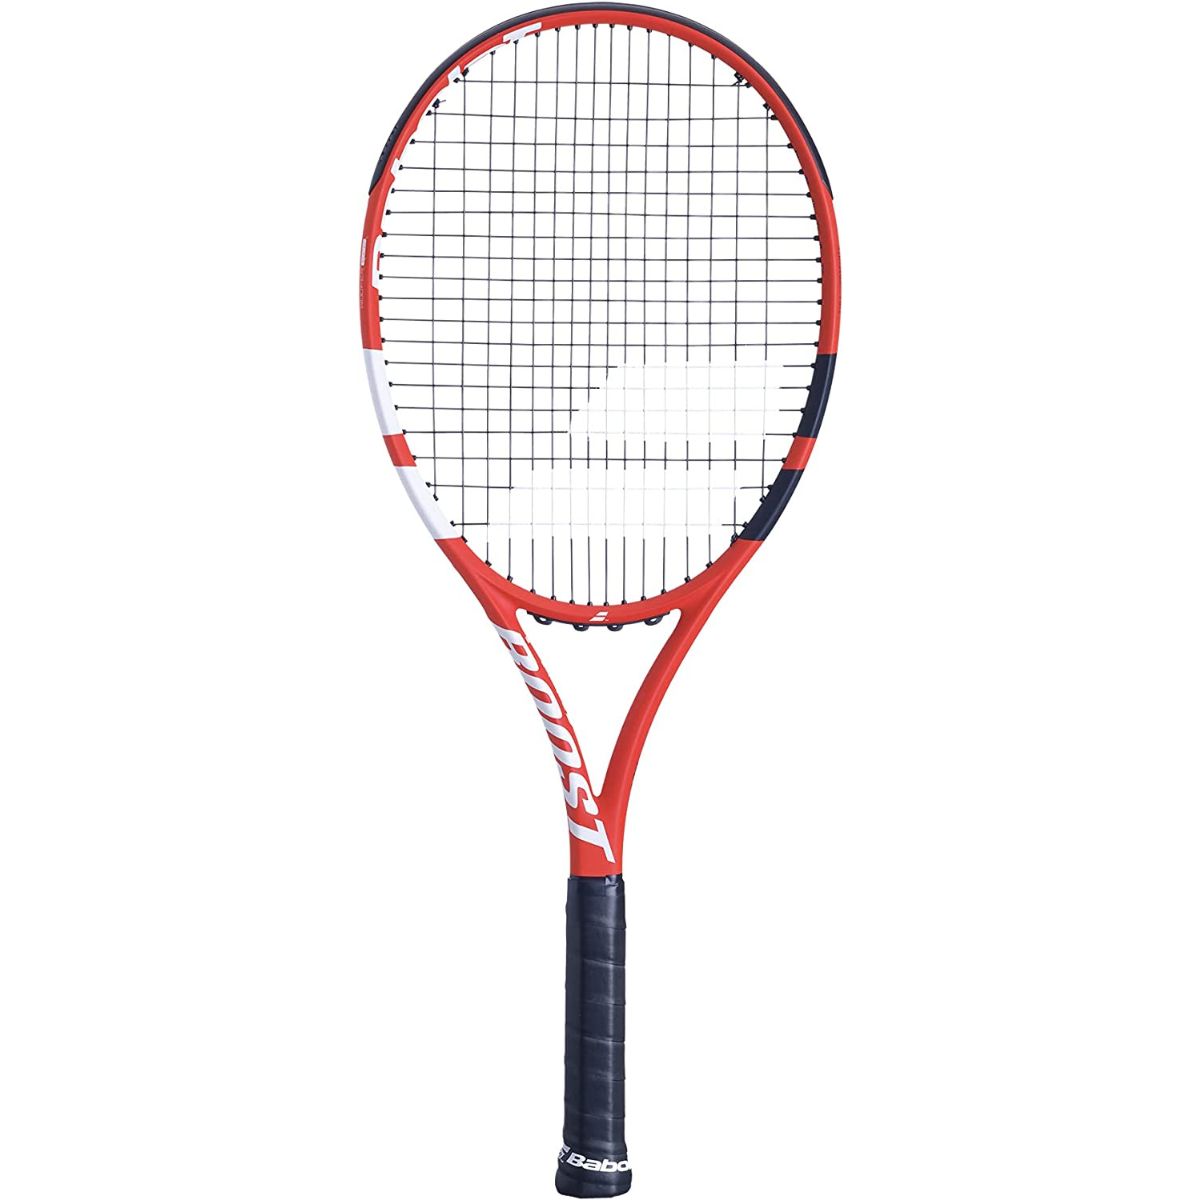 The Best Tennis Rackets Under $100 Options: Babolat Boost S